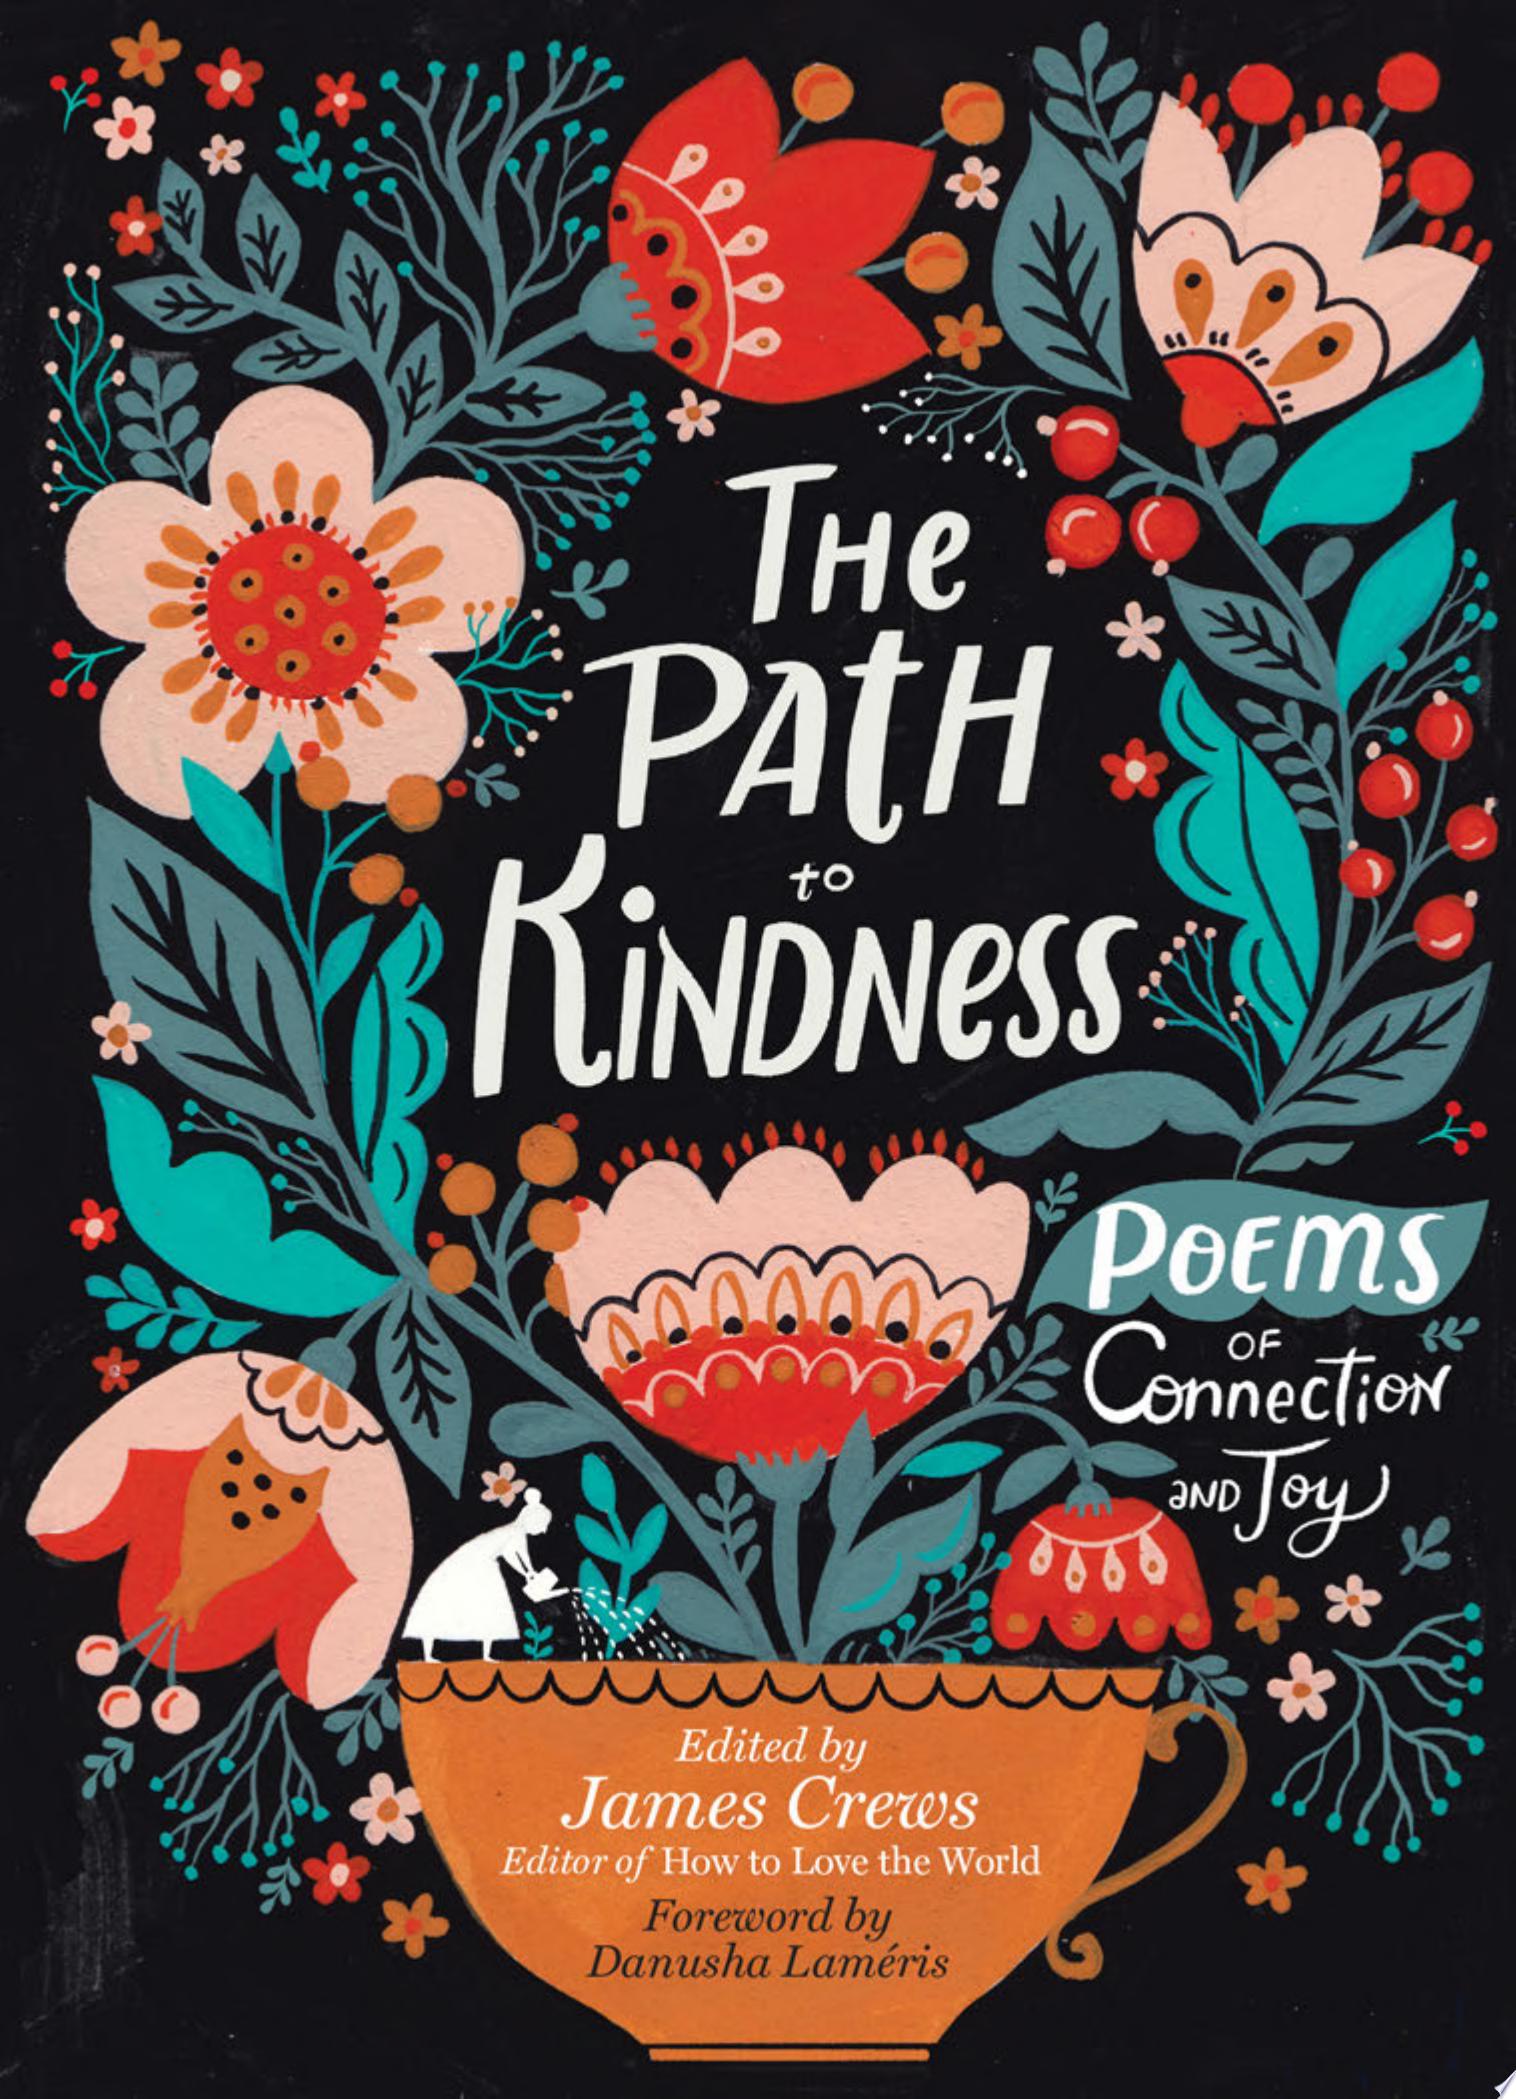 Image for "The Path to Kindness"